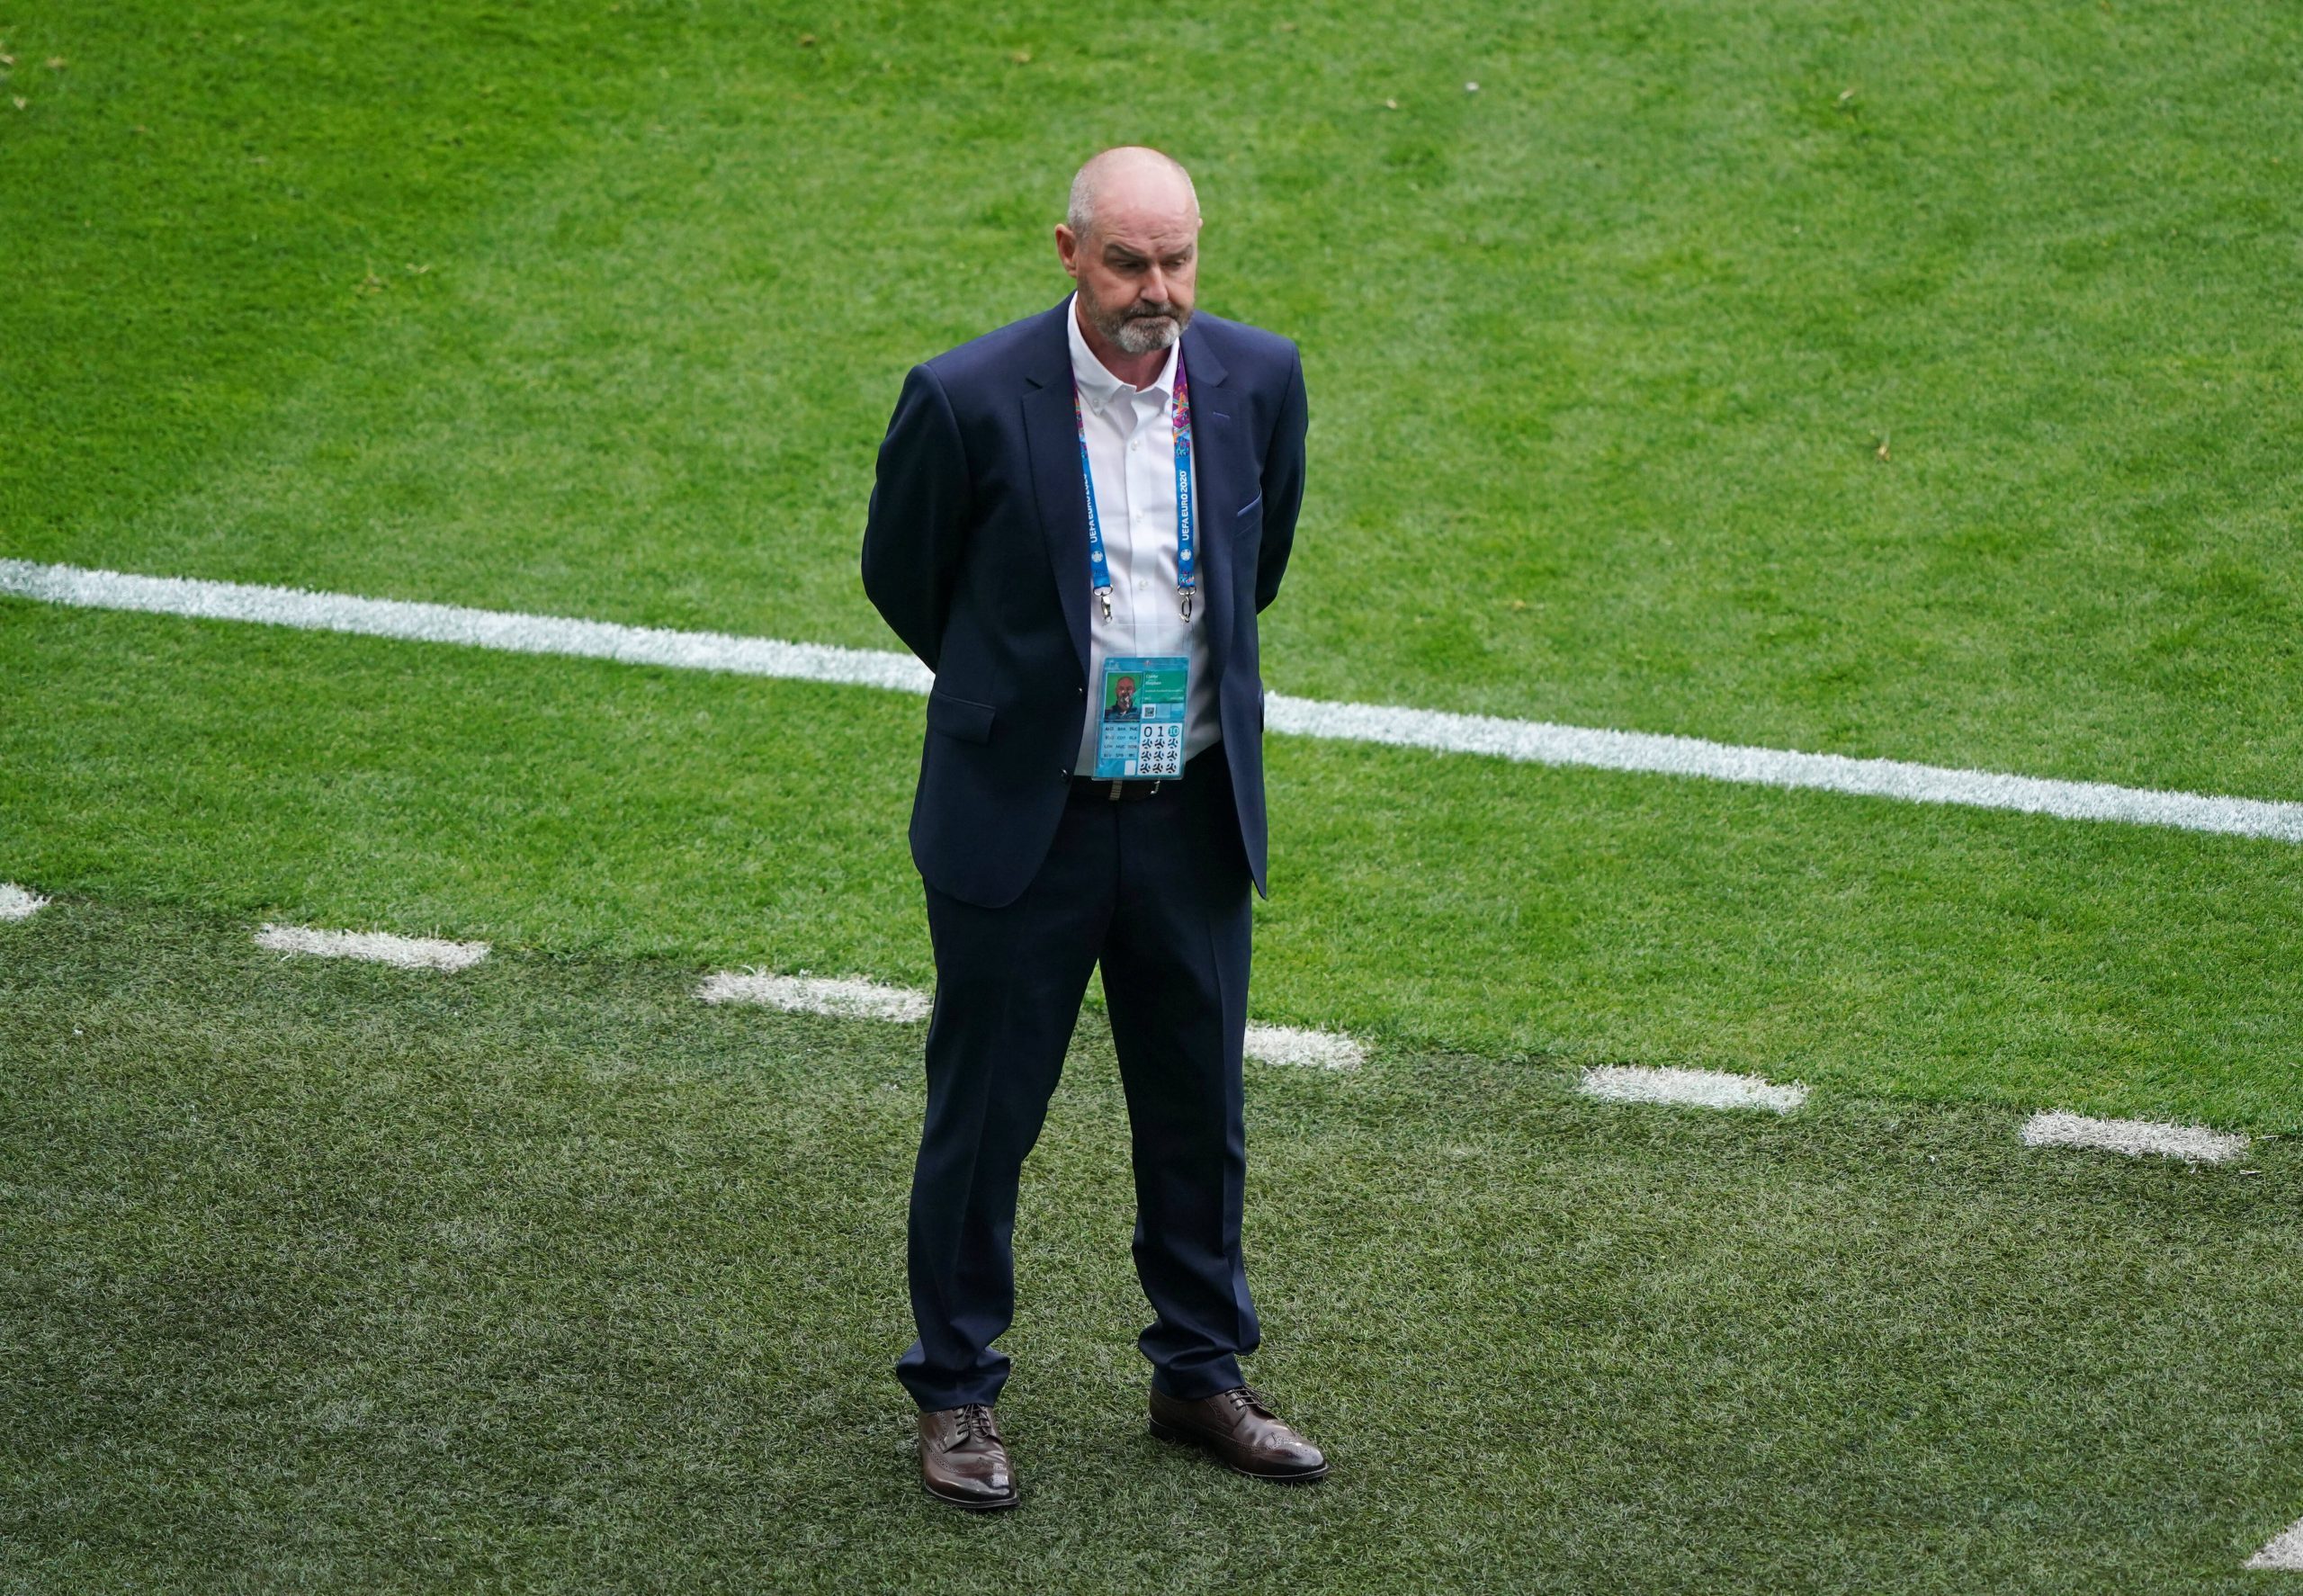 Feeble selection from Steve Clarke costs Scotland